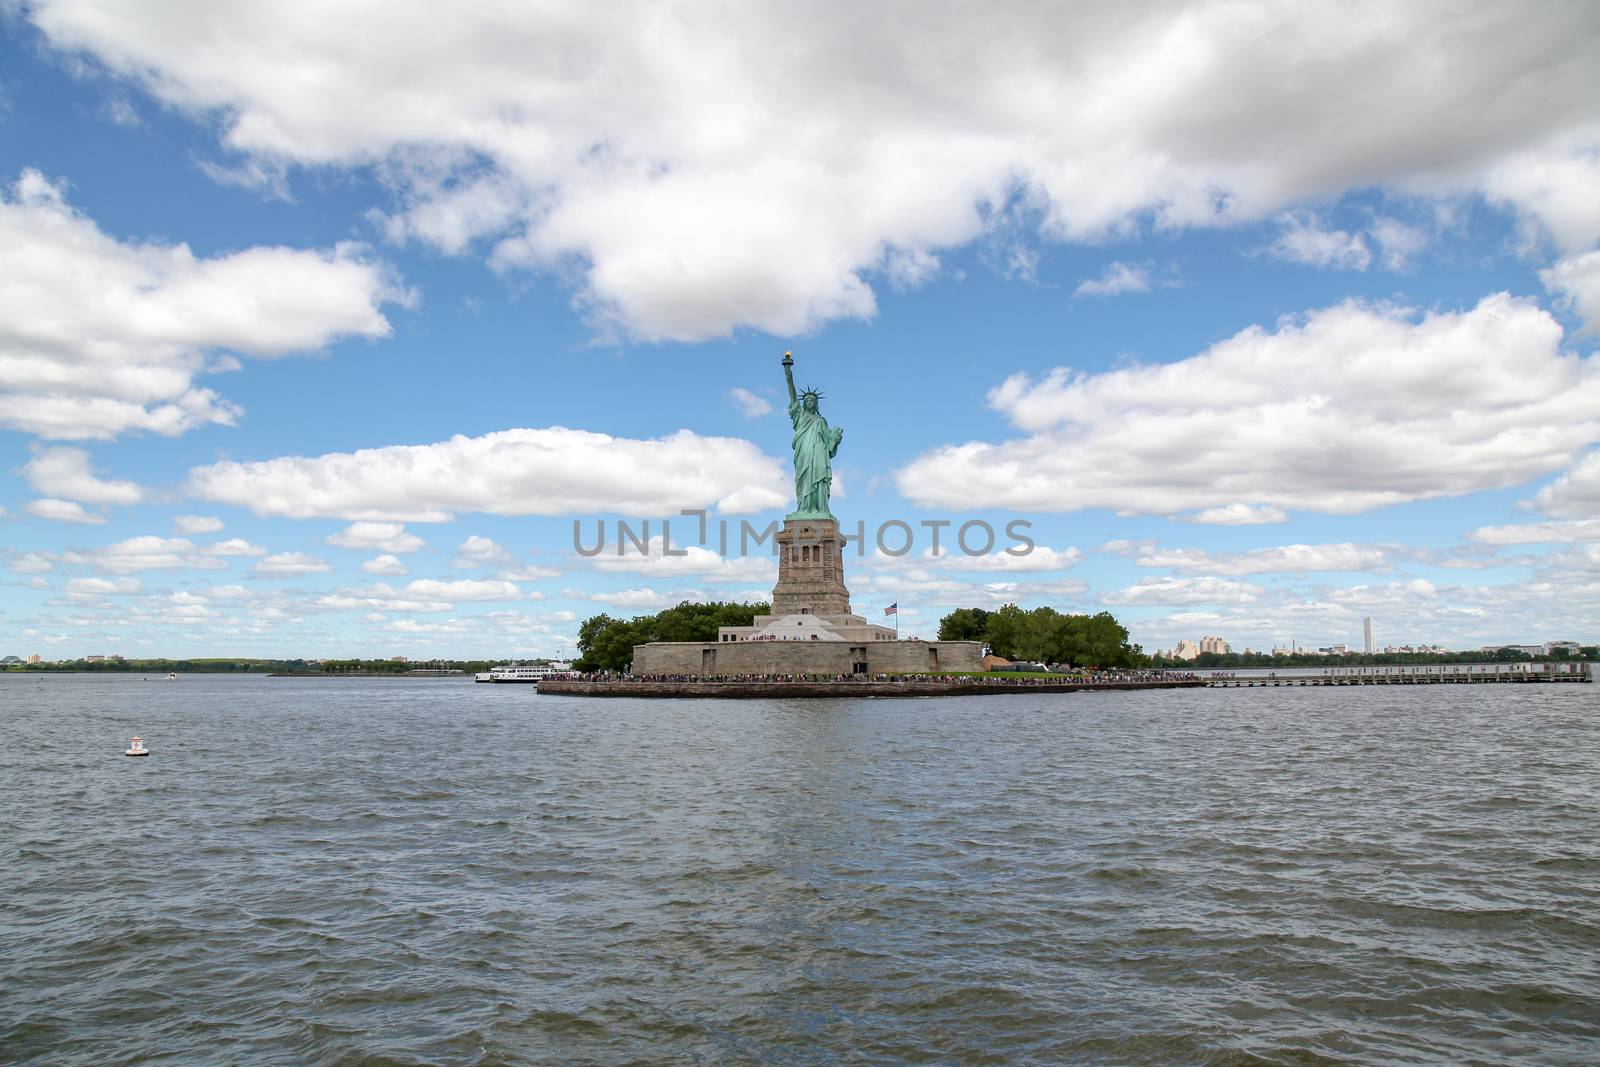 The Statue of liberty is famous  in New York ,USA. by pumppump